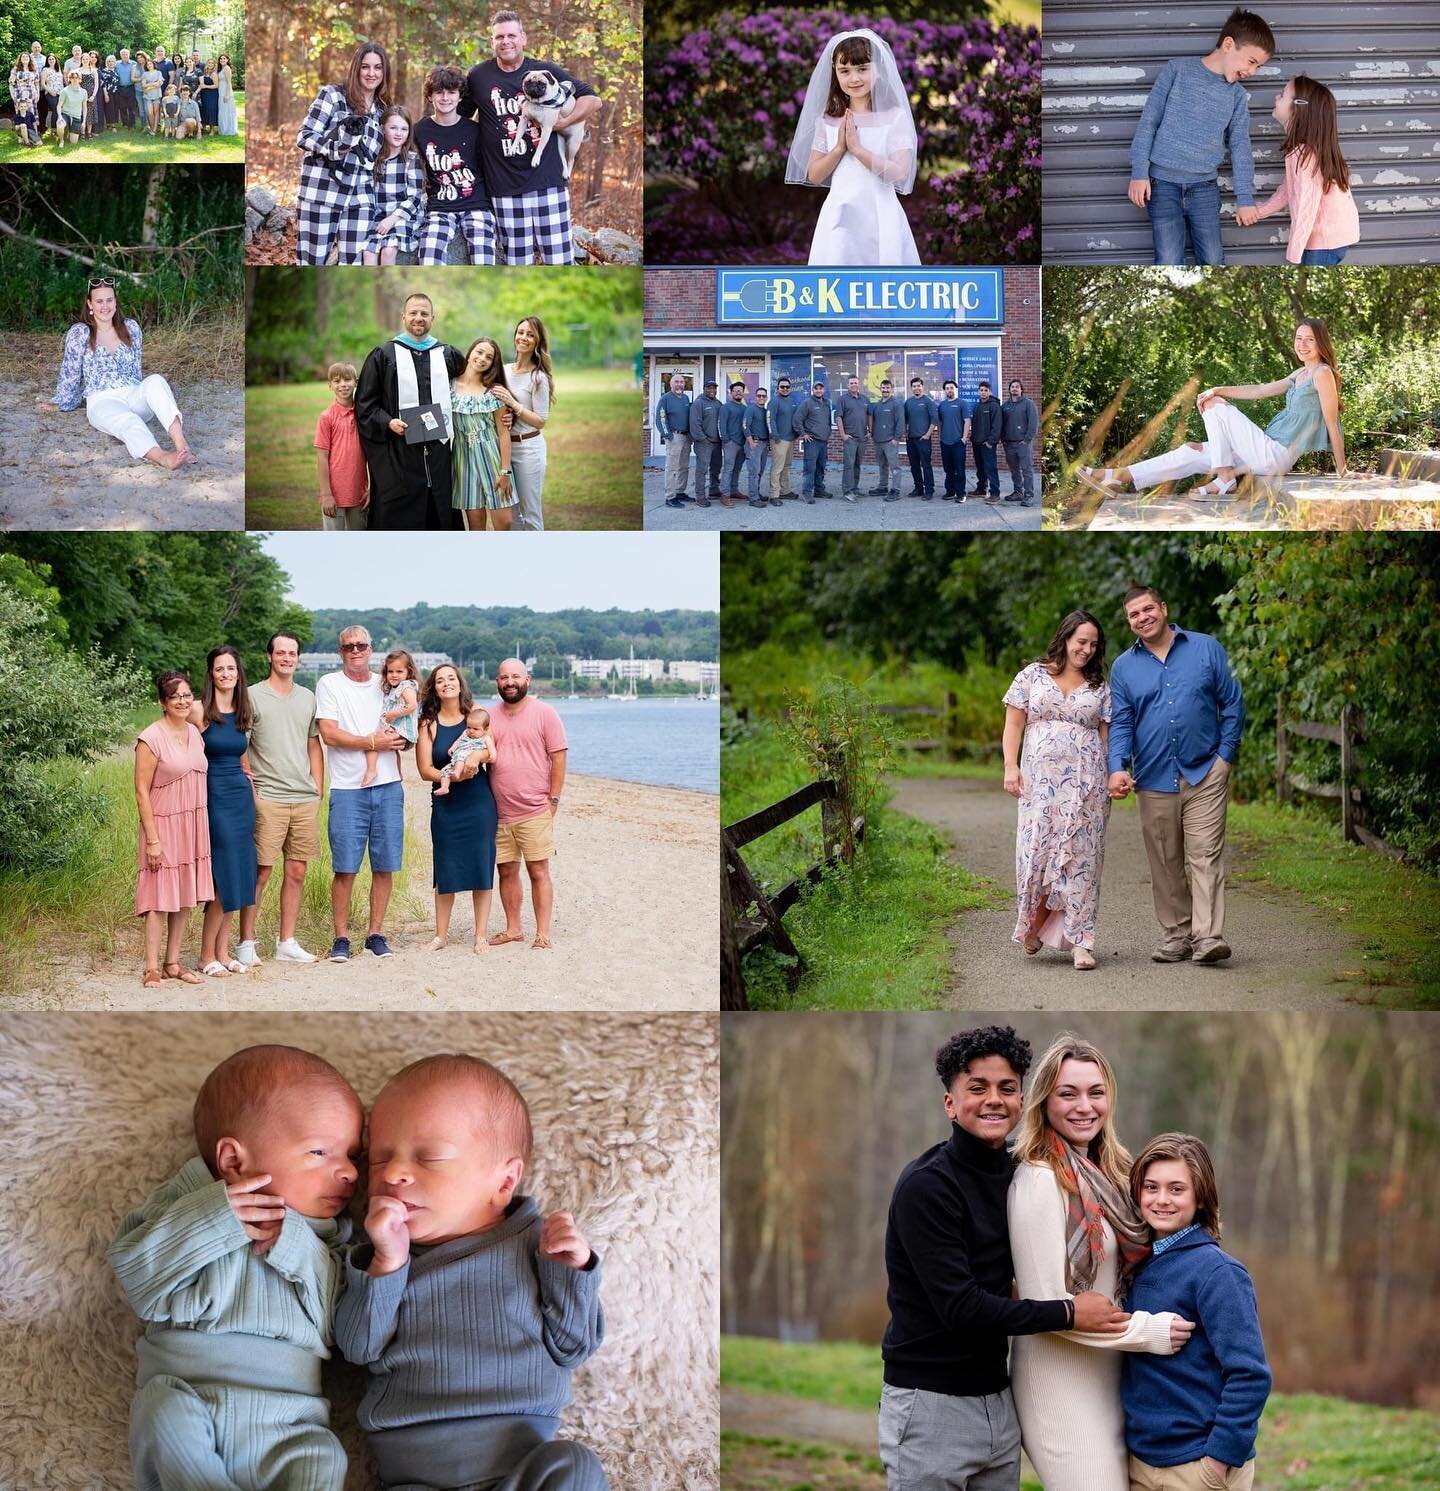 Year in review, part 3! Thank you to the families who continues to support my small business. #spmillsphotography #riphotographer #riphotography #rifamilyphotographer #richildrensphotography